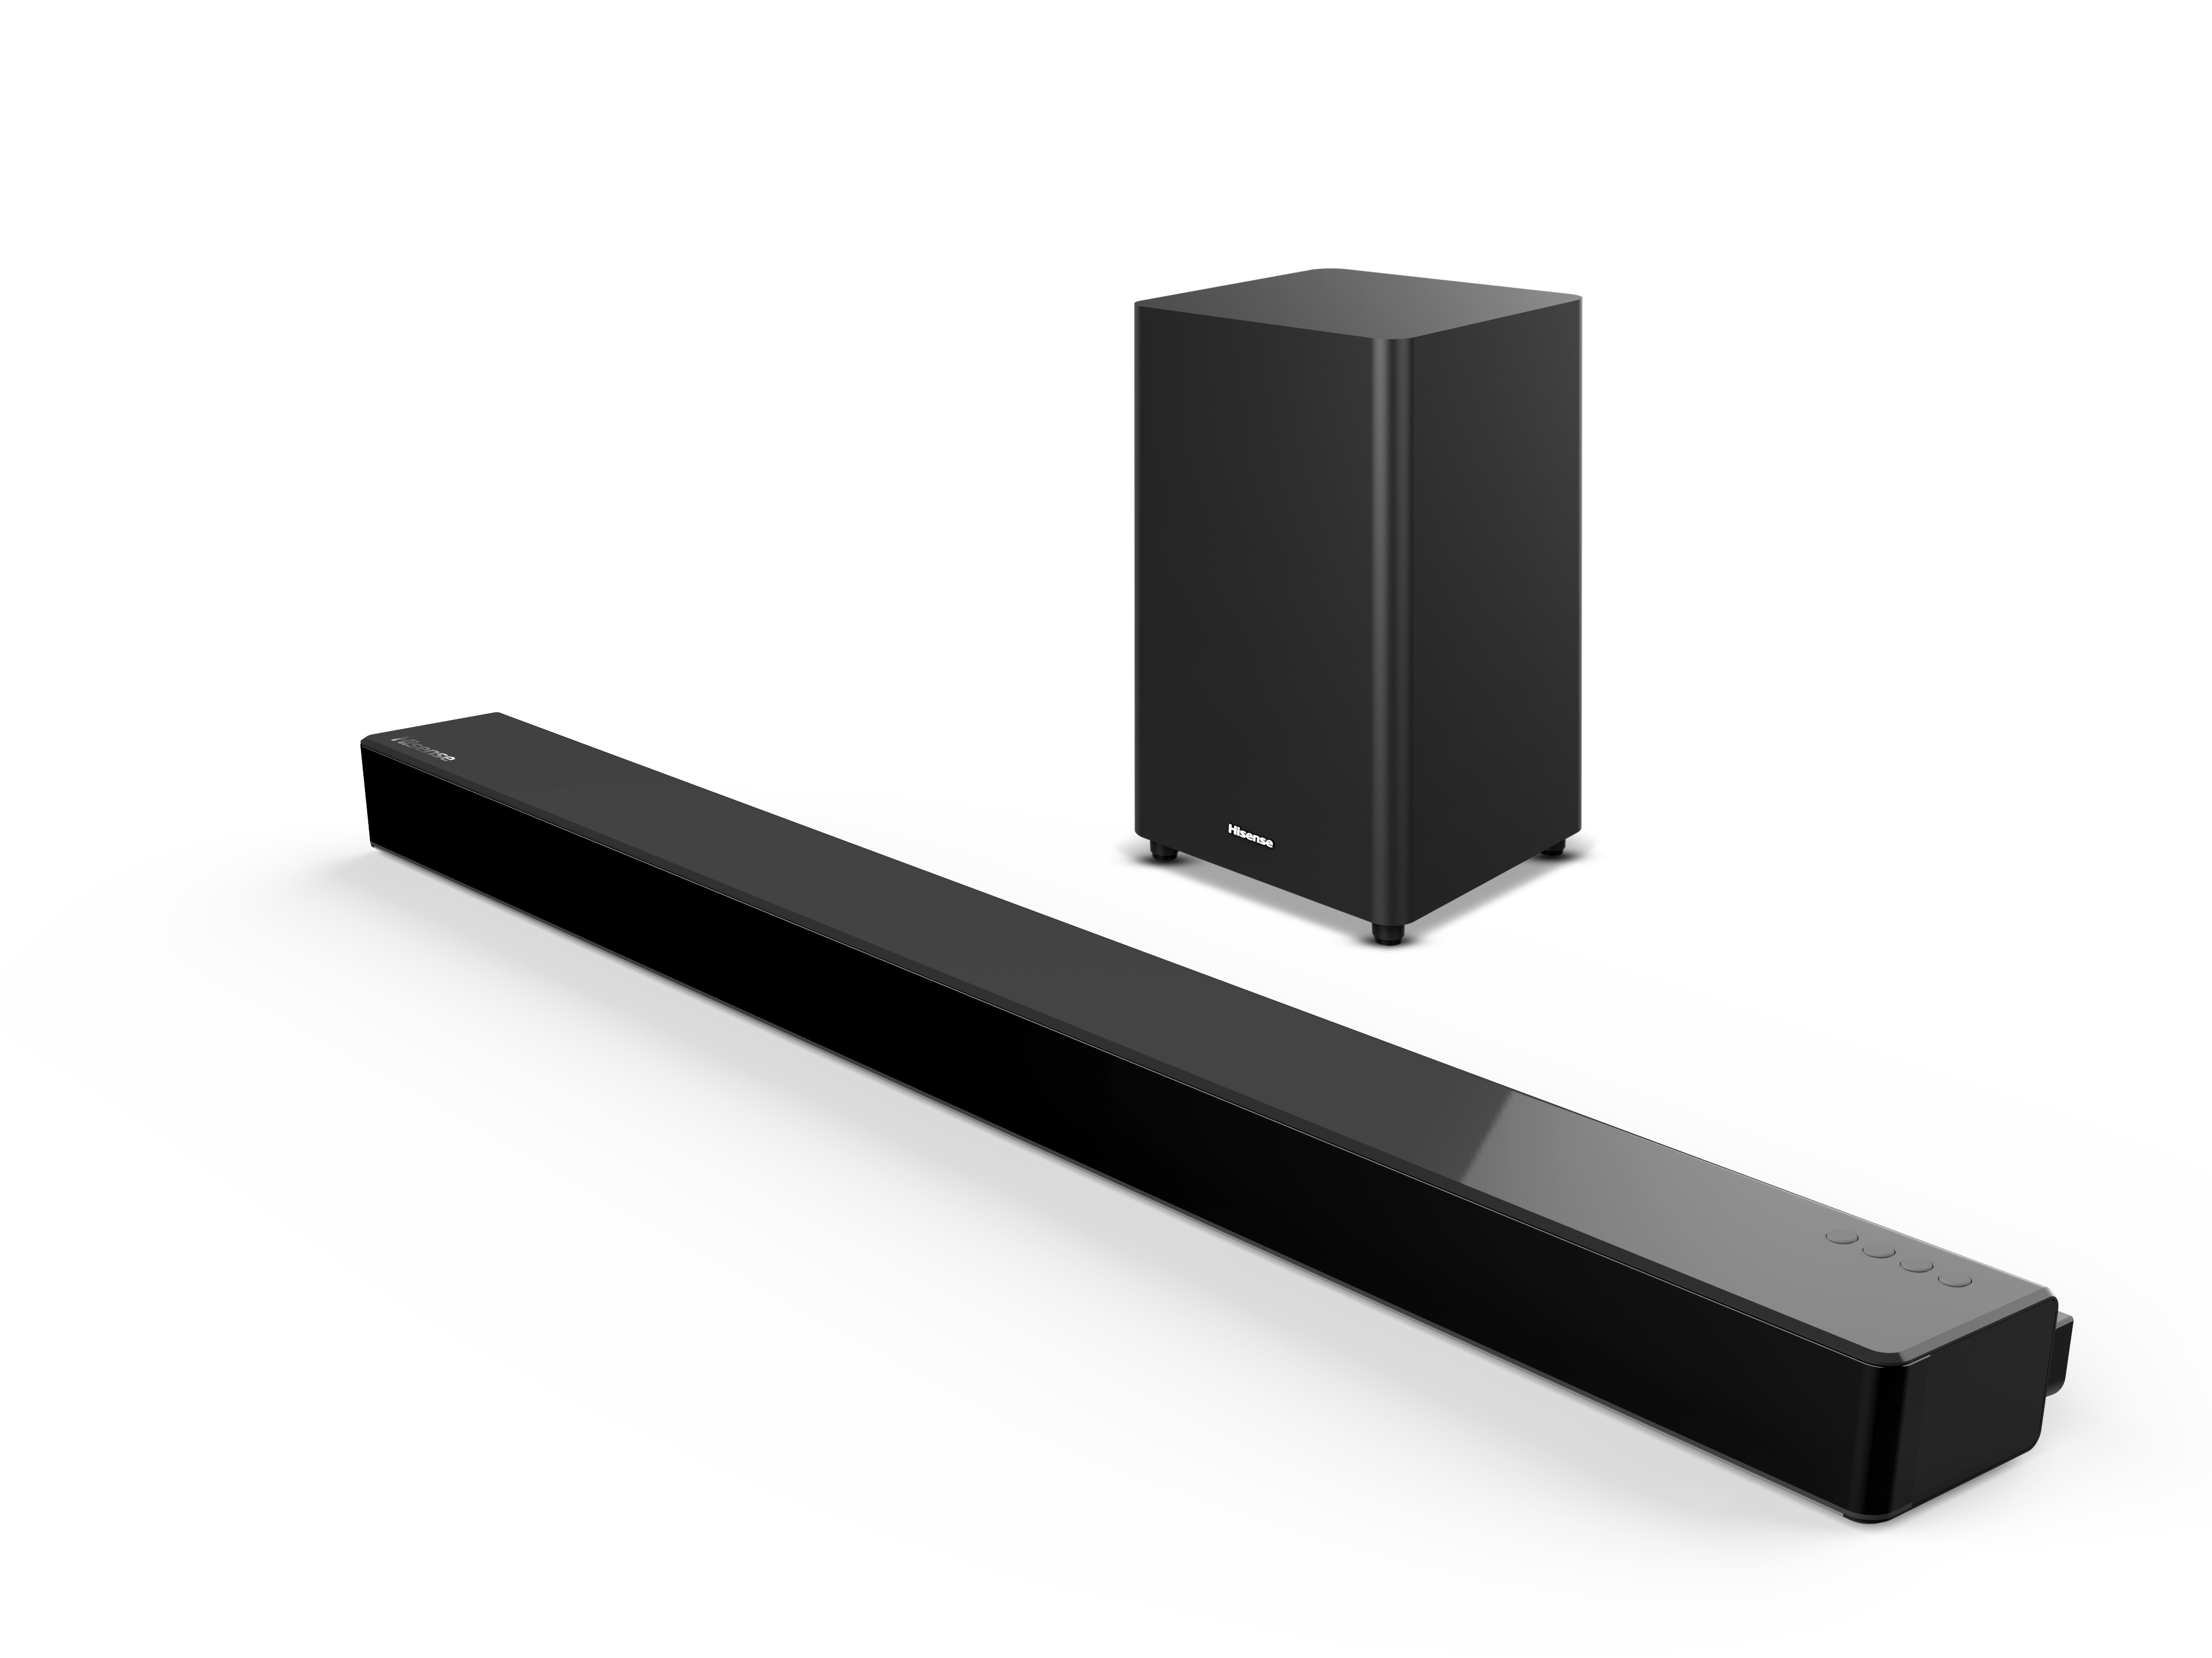 Hisense HS312 3.1ch Sound Bar with Wireless Subwoofer, 300W, Dolby Atmos, 4K Pass-Through, Cinematic Experience, One Remote Contorl, Bluetooth, HDMI ARC/Optical/AUX/USB (Model HS312) Black - image 1 of 22